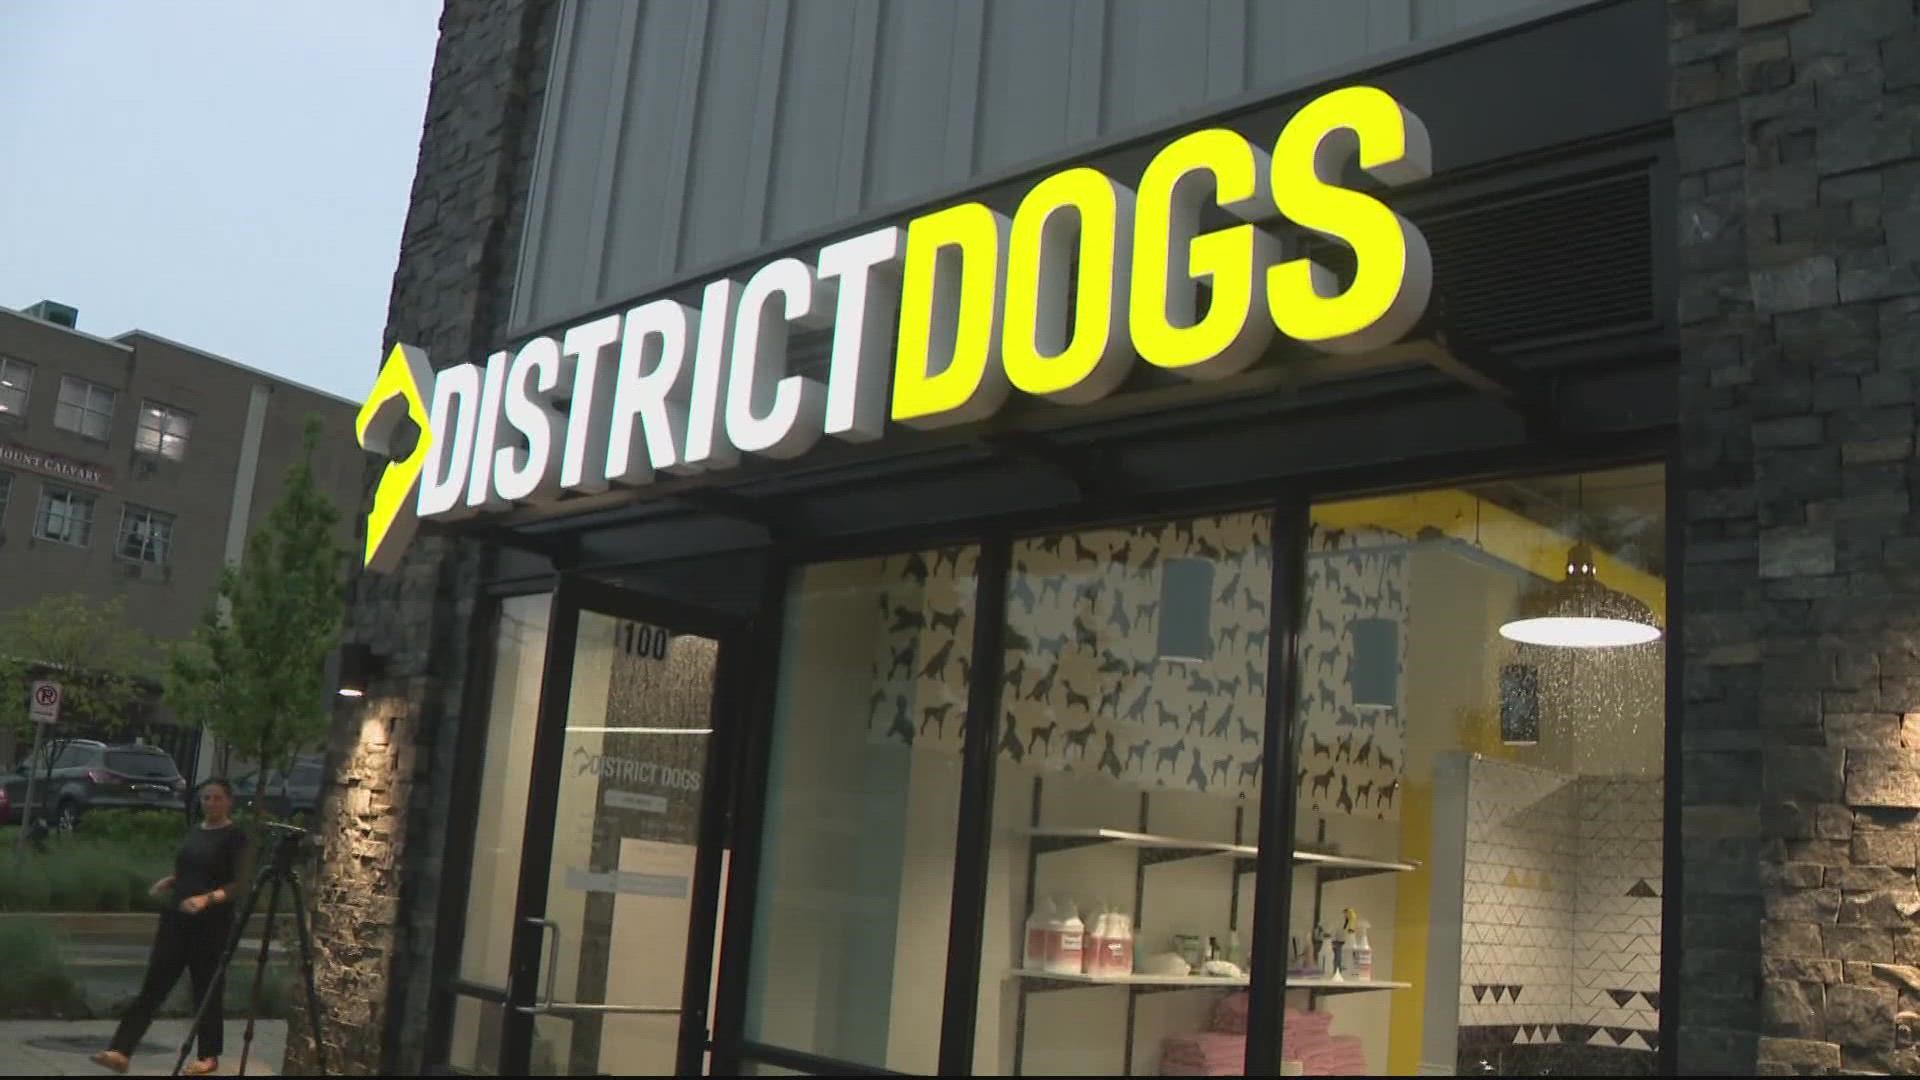 District Dogs in Northeast has dealt with severe flooding three times in the last month.